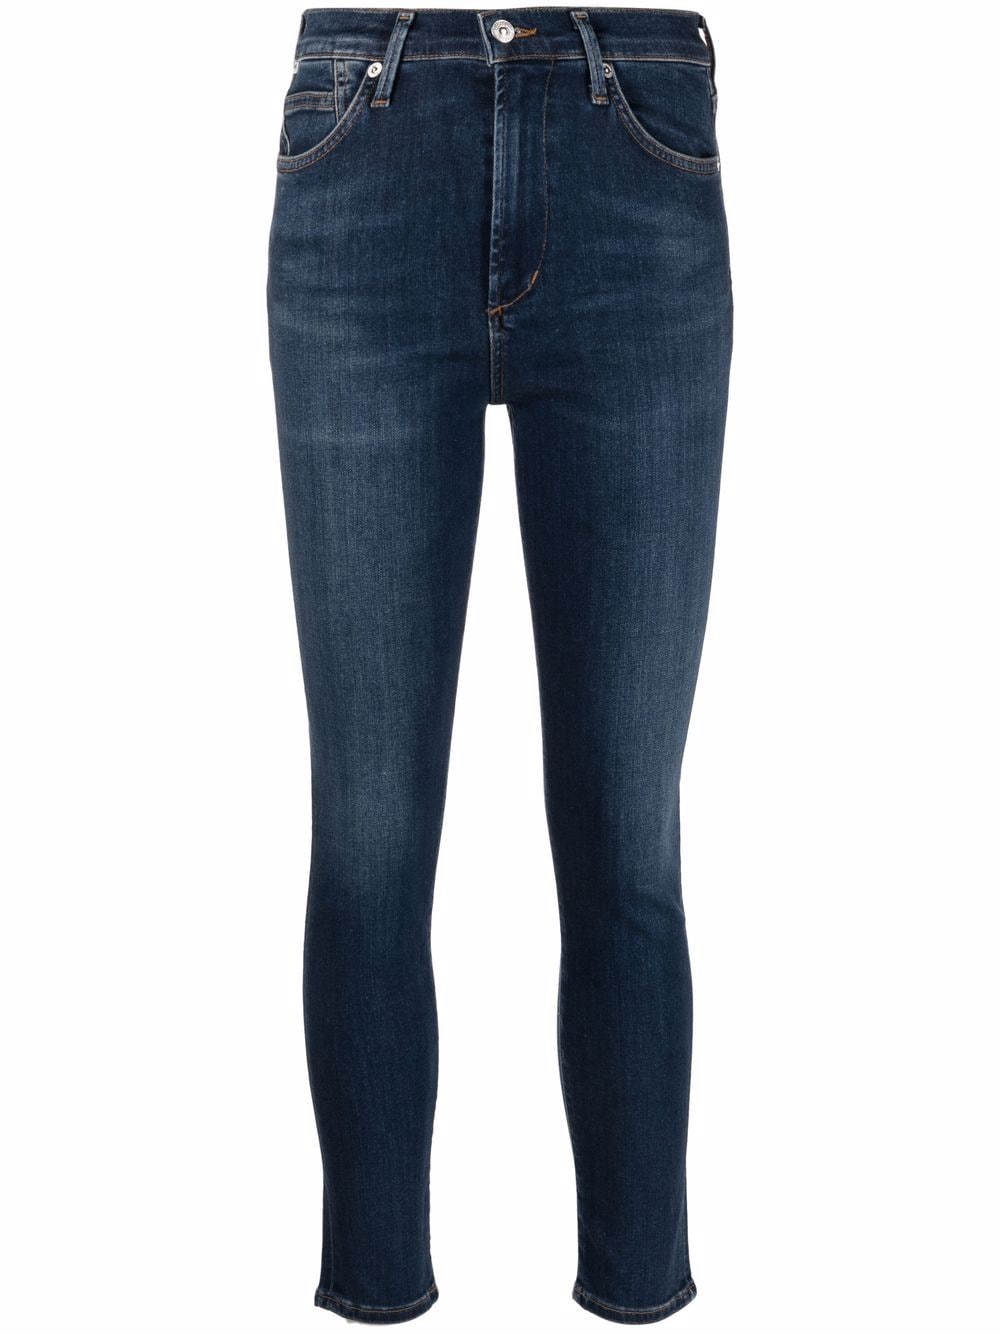 Citizens of Humanity Rocket mid-rise skinny jeans - Blue von Citizens of Humanity